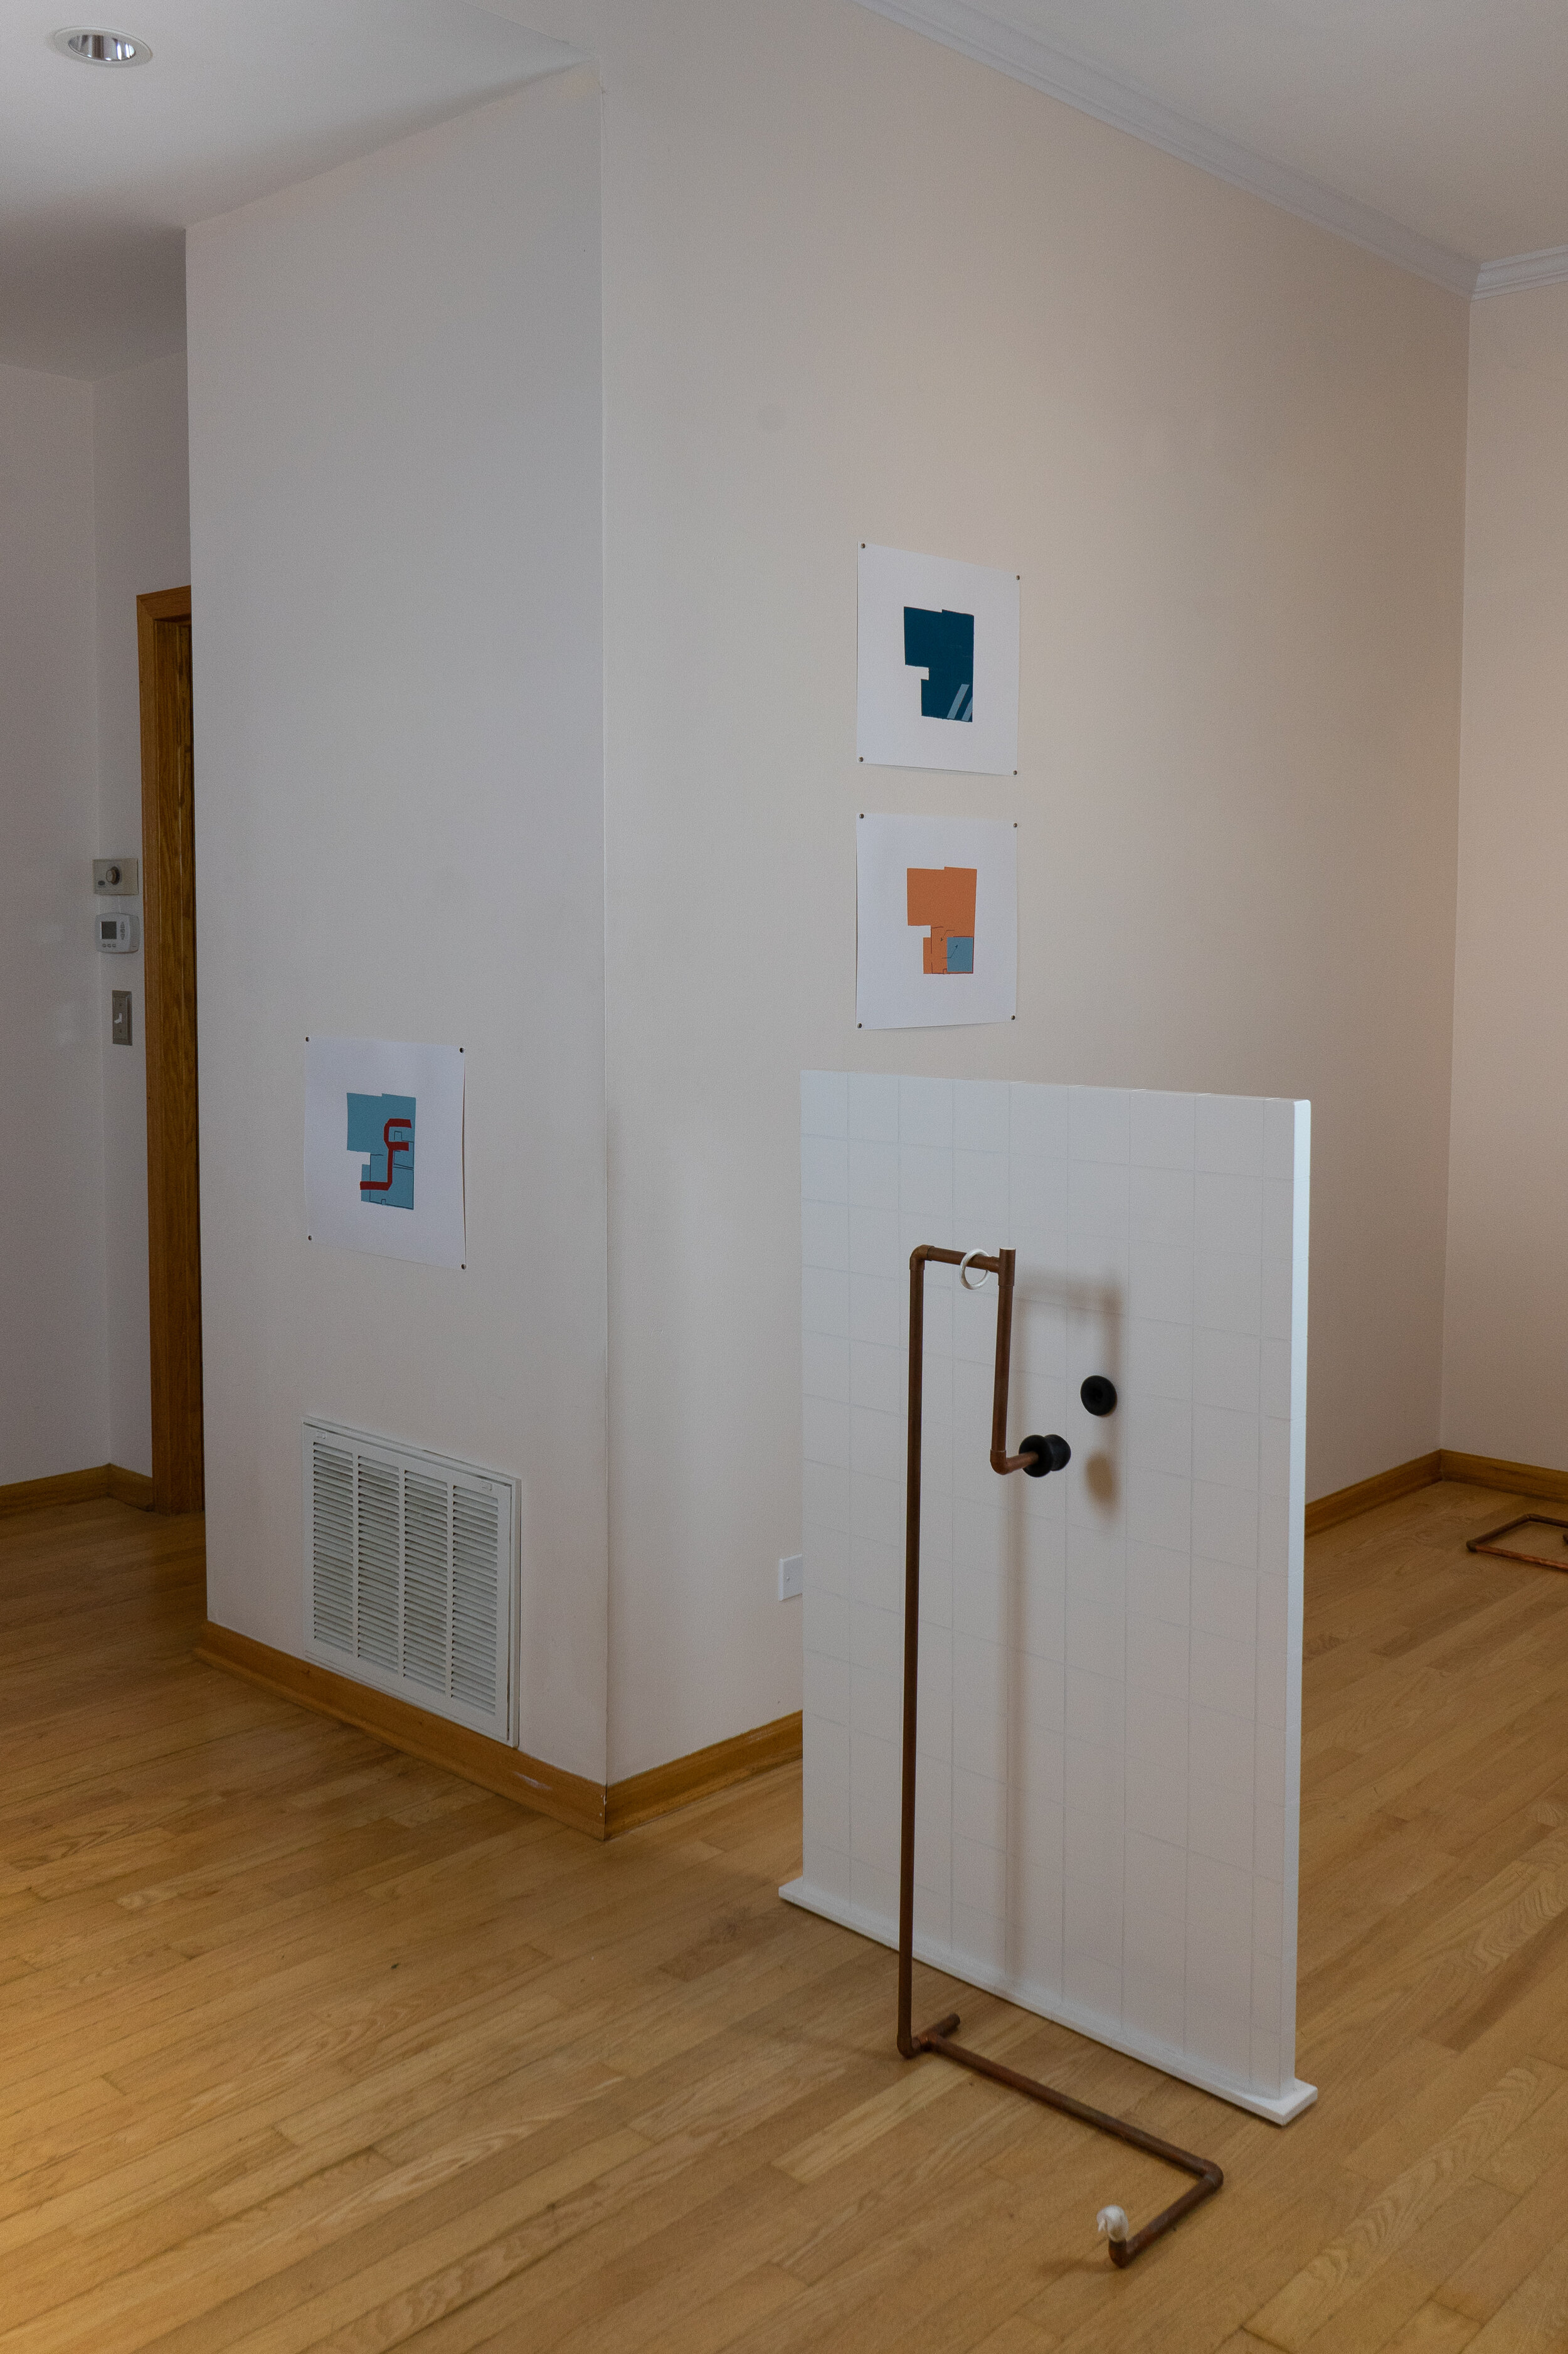  Modules and Other Nonsense at  Langer Over Dickie  with  Elliot Doughtie  